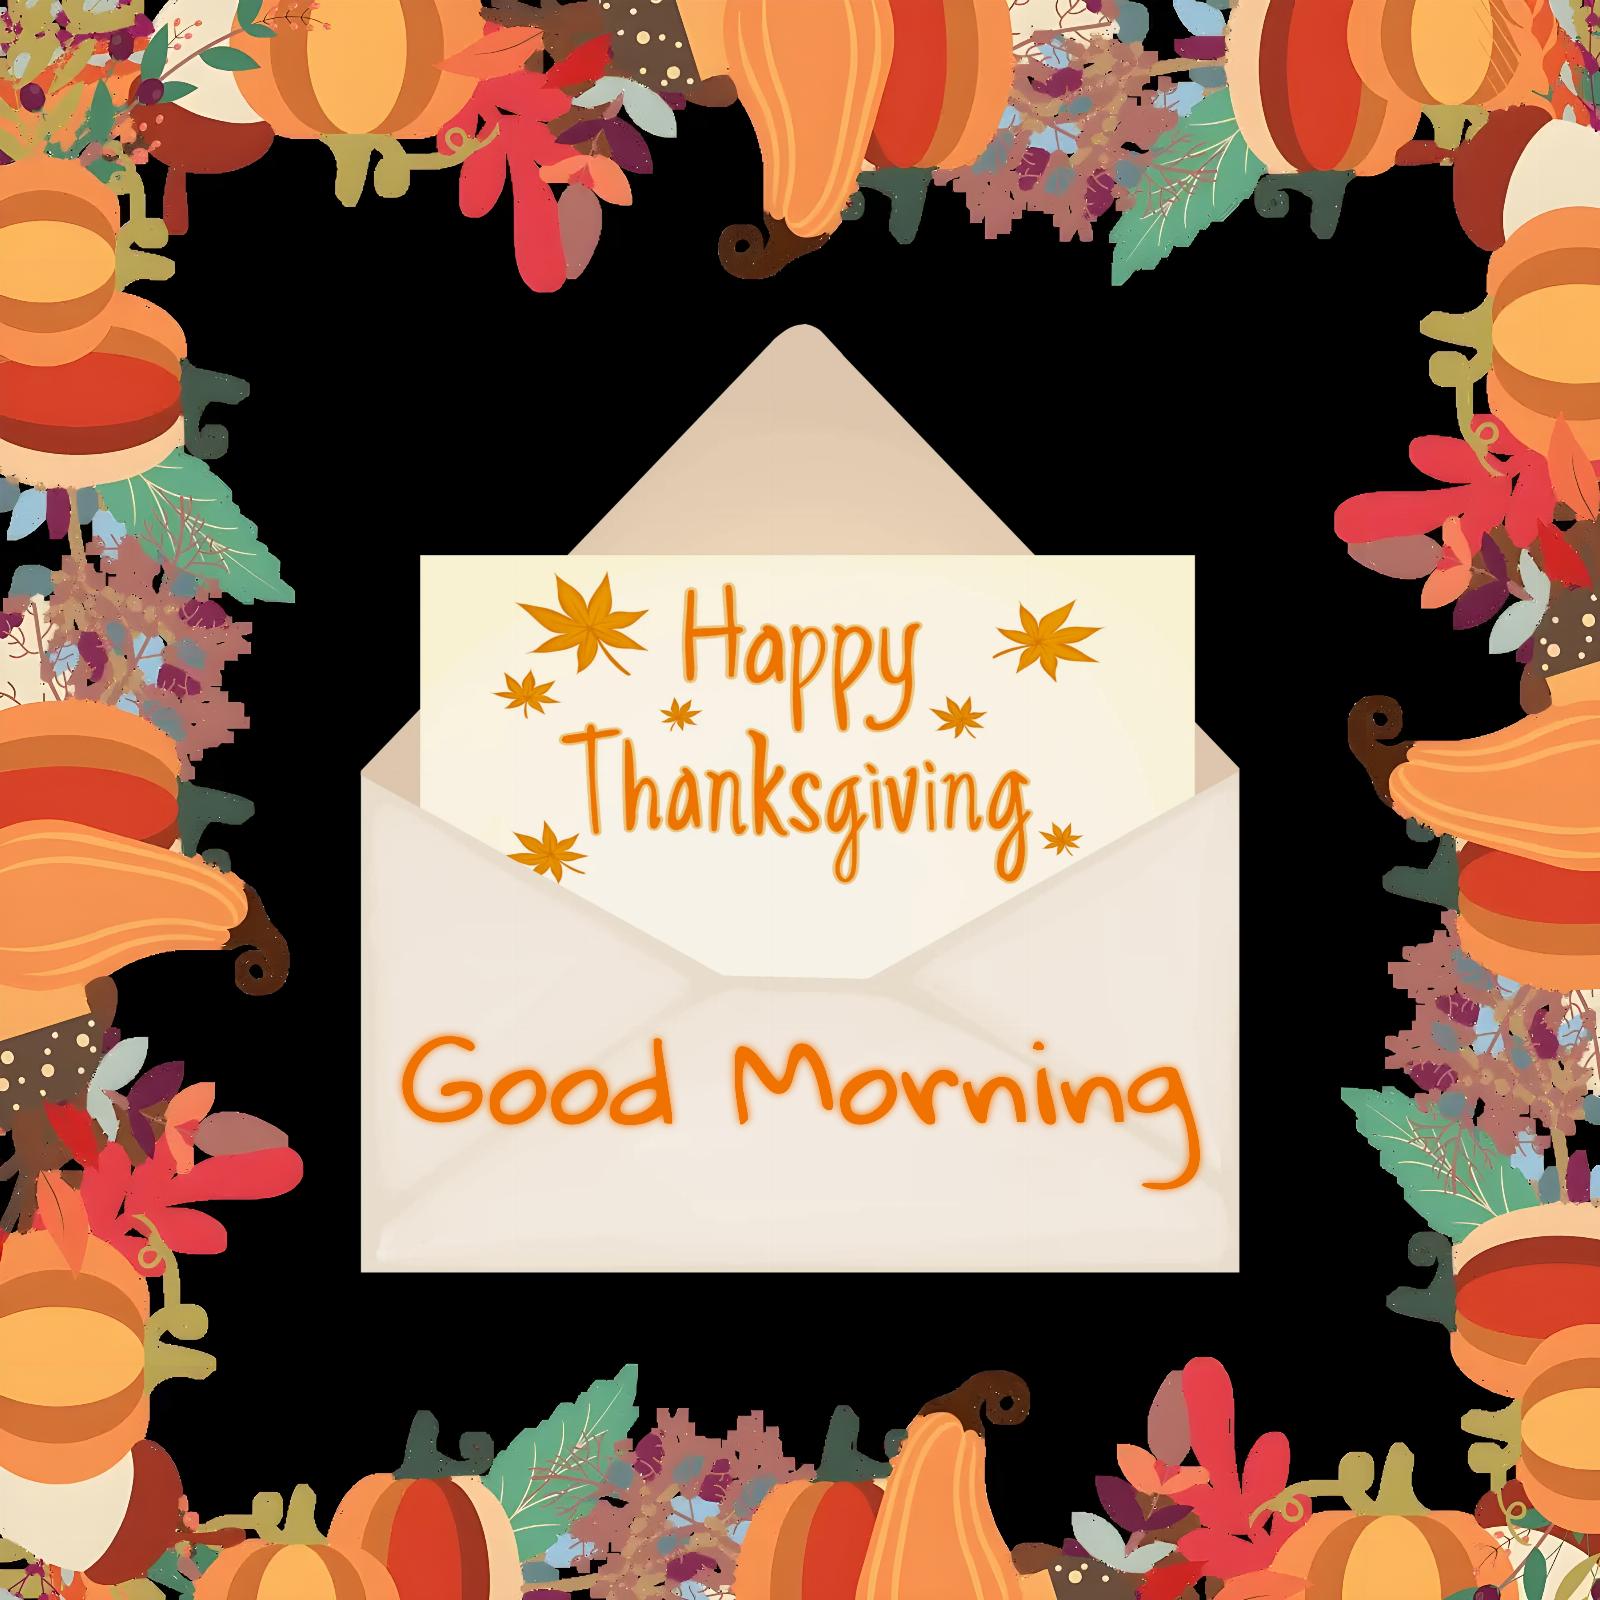 Happy Thanksgiving Good Morning Images